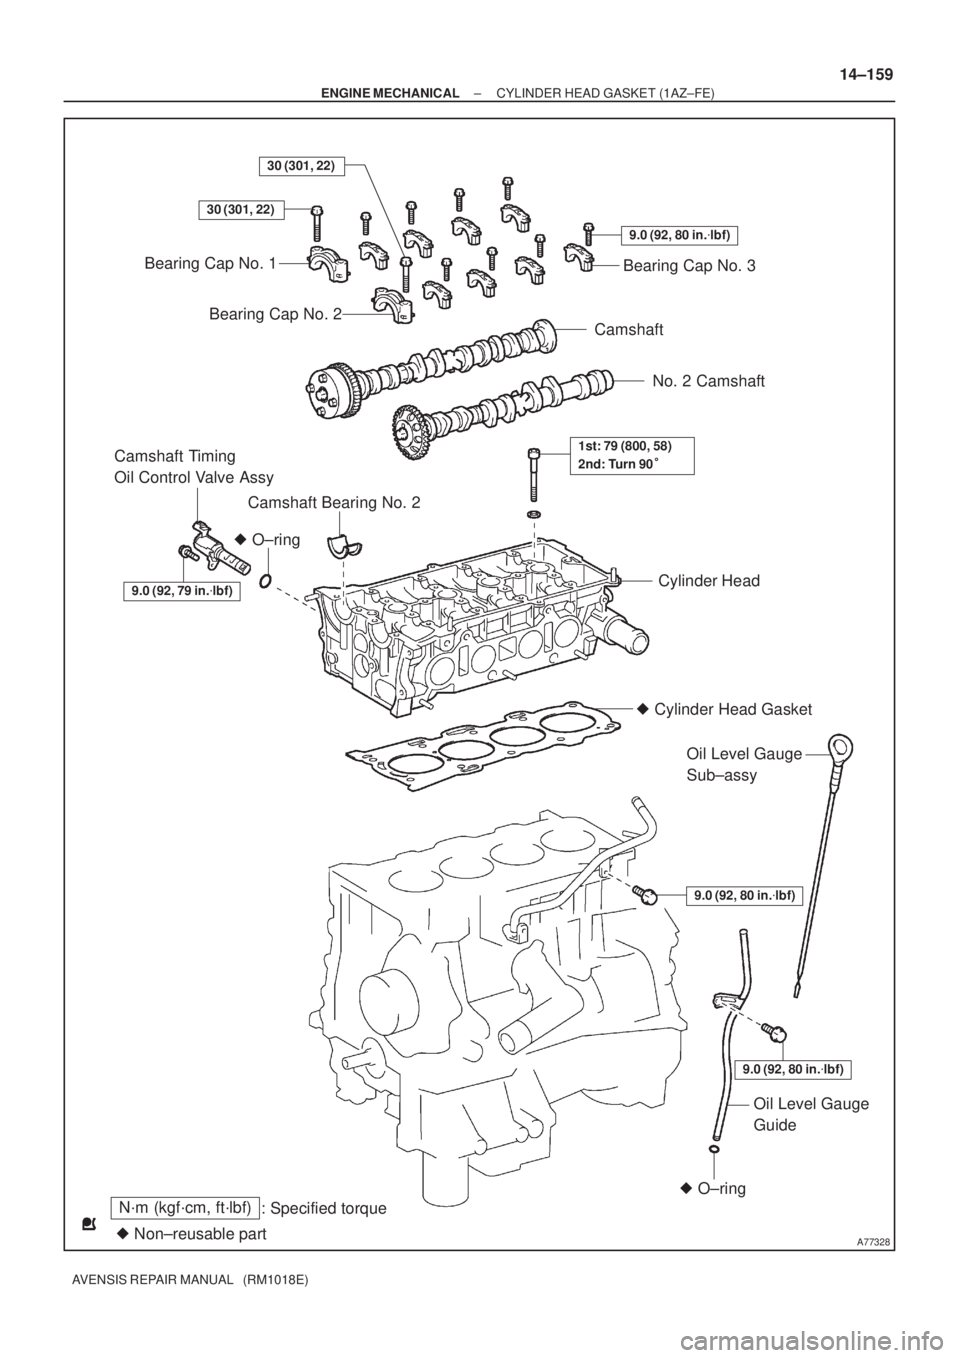 TOYOTA AVENSIS 2005  Service Repair Manual A77328
N´m (kgf´cm, ft´lbf)
: Specified torque
 Non±reusable part
30 (301, 22)
 O±ring
Bearing Cap No. 1
Bearing Cap No. 2
9.0 (92, 80 in.lbf)
Bearing Cap No. 3
Camshaft
No. 2 Camshaft
Camshaf